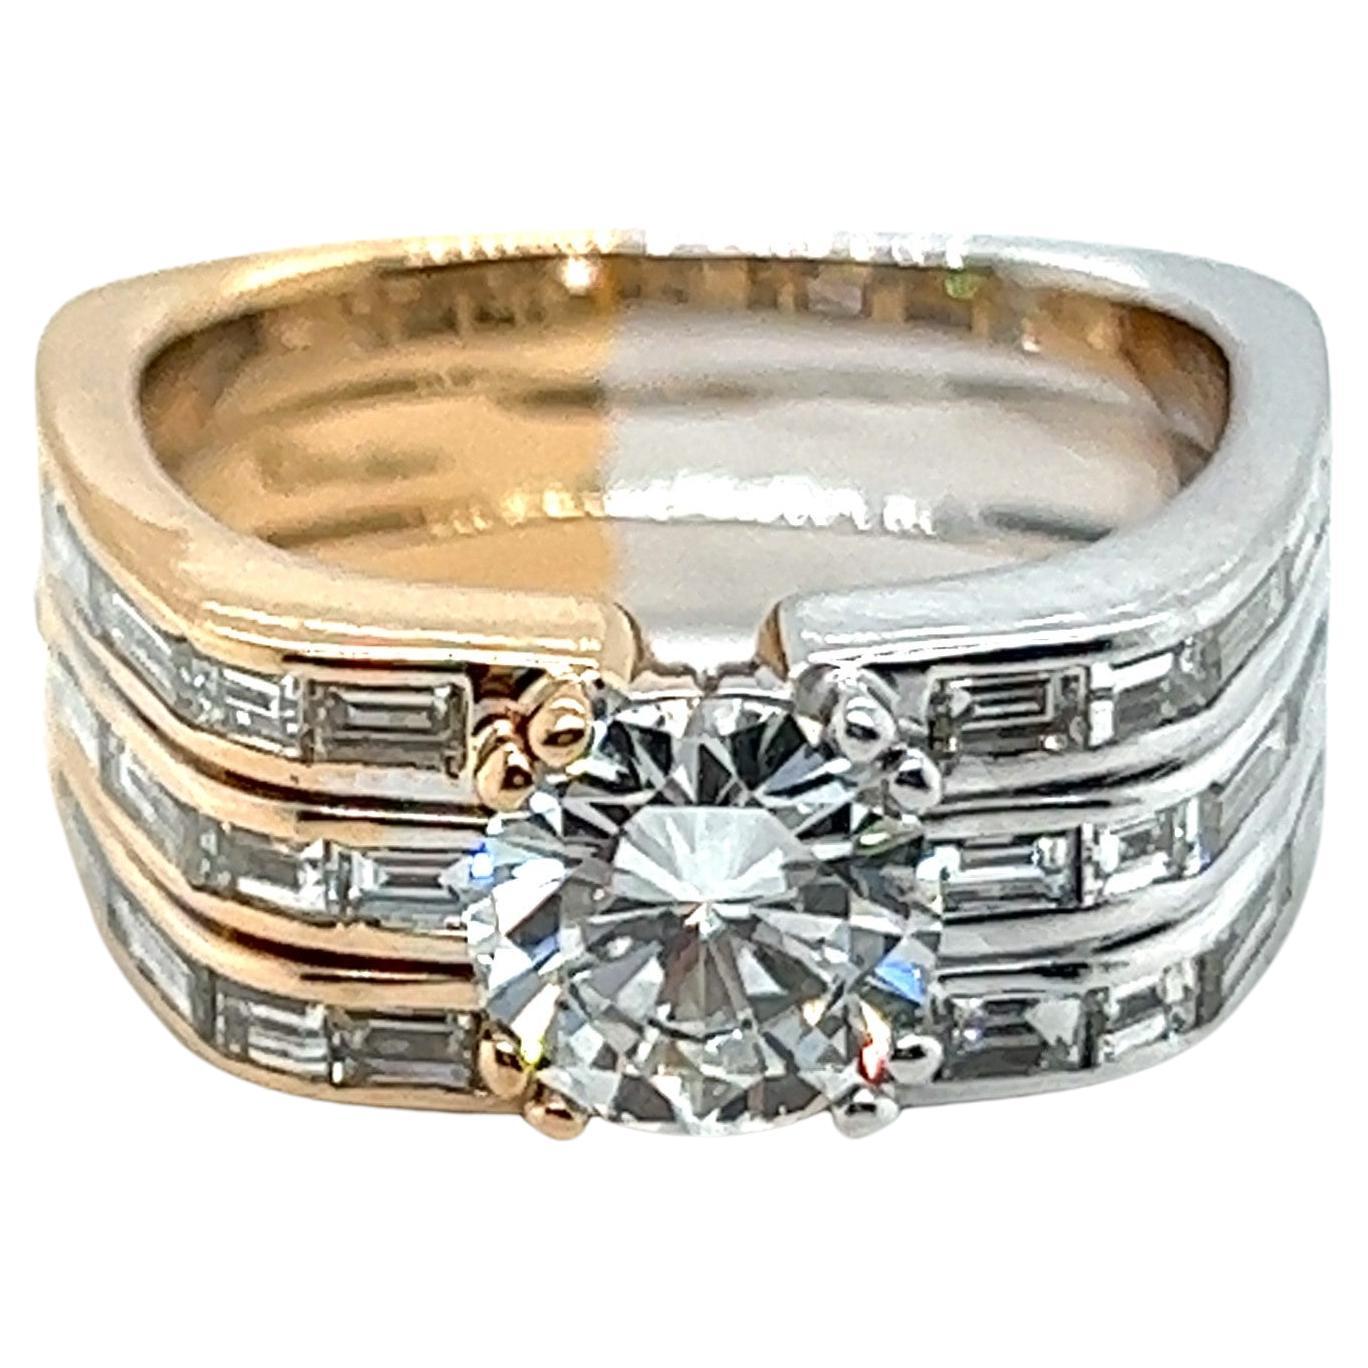 Graphic Diamond Ring in 18 Karat White and Red Gold by Binder For Sale